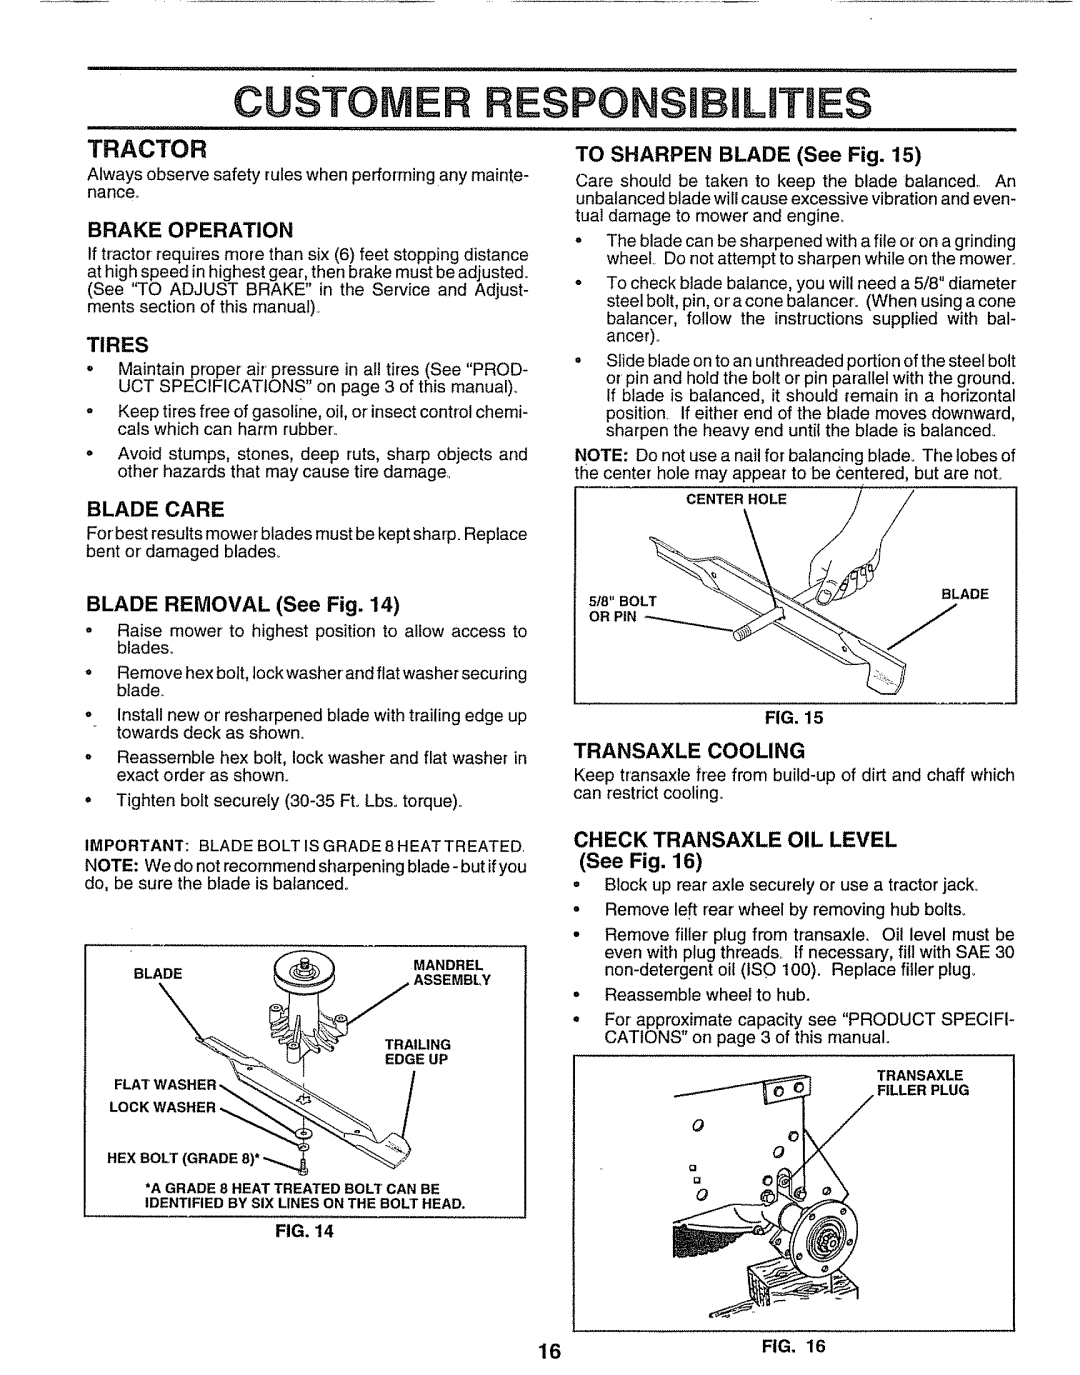 Sears 917.25597 owner manual Custom Esponsi L Es, Tractor, Blade Care, TO SHARPEN BLADE See Fig, BLADE REMOVAL See Fig 